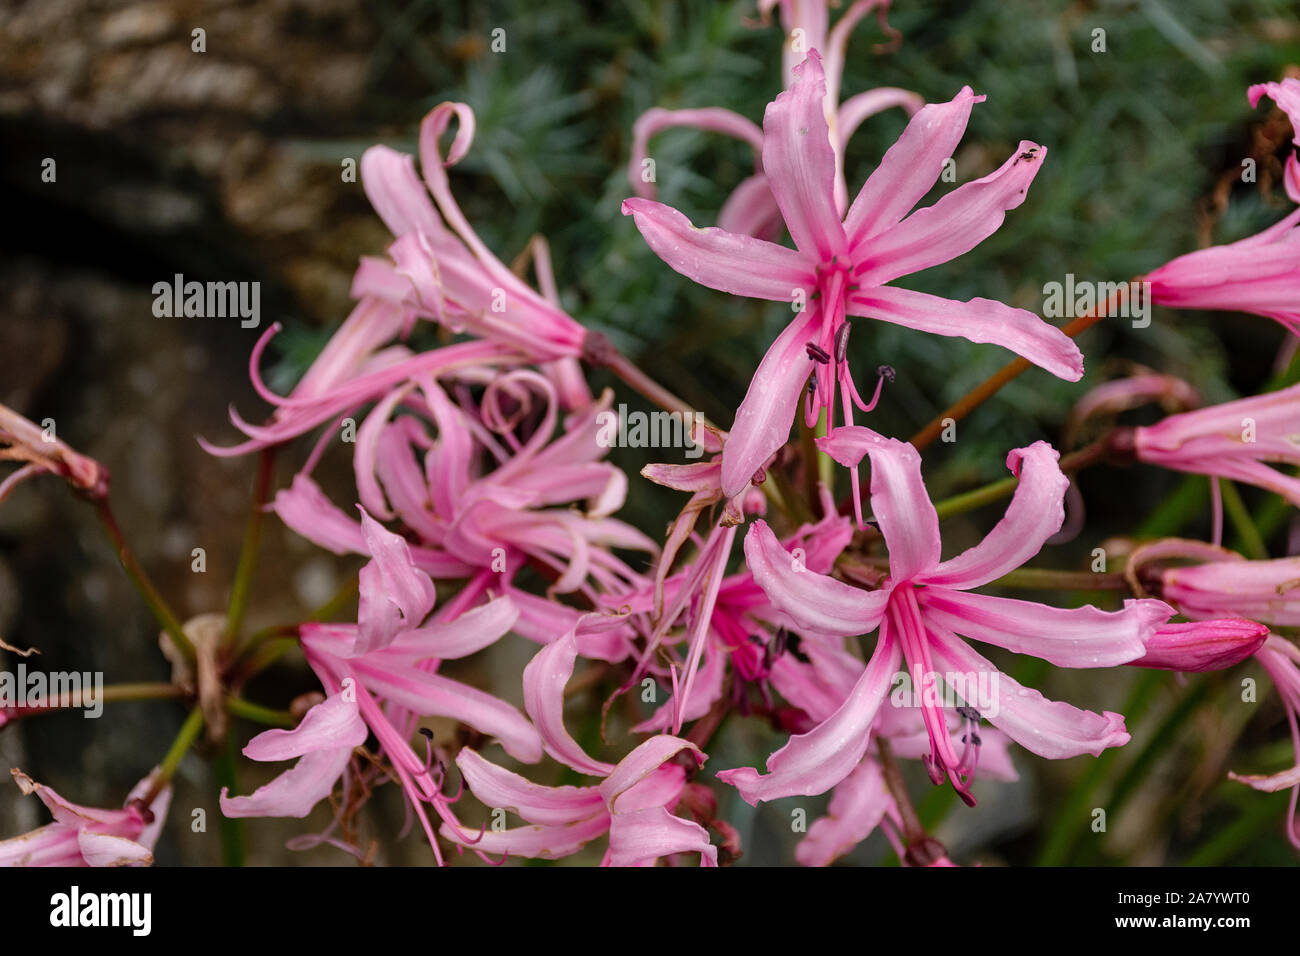 Nerine Bowdenii glowers in pink. Large group of flowers. Amaryllidaceae family. Pink floers and hebaceous green foliage. Stock Photo